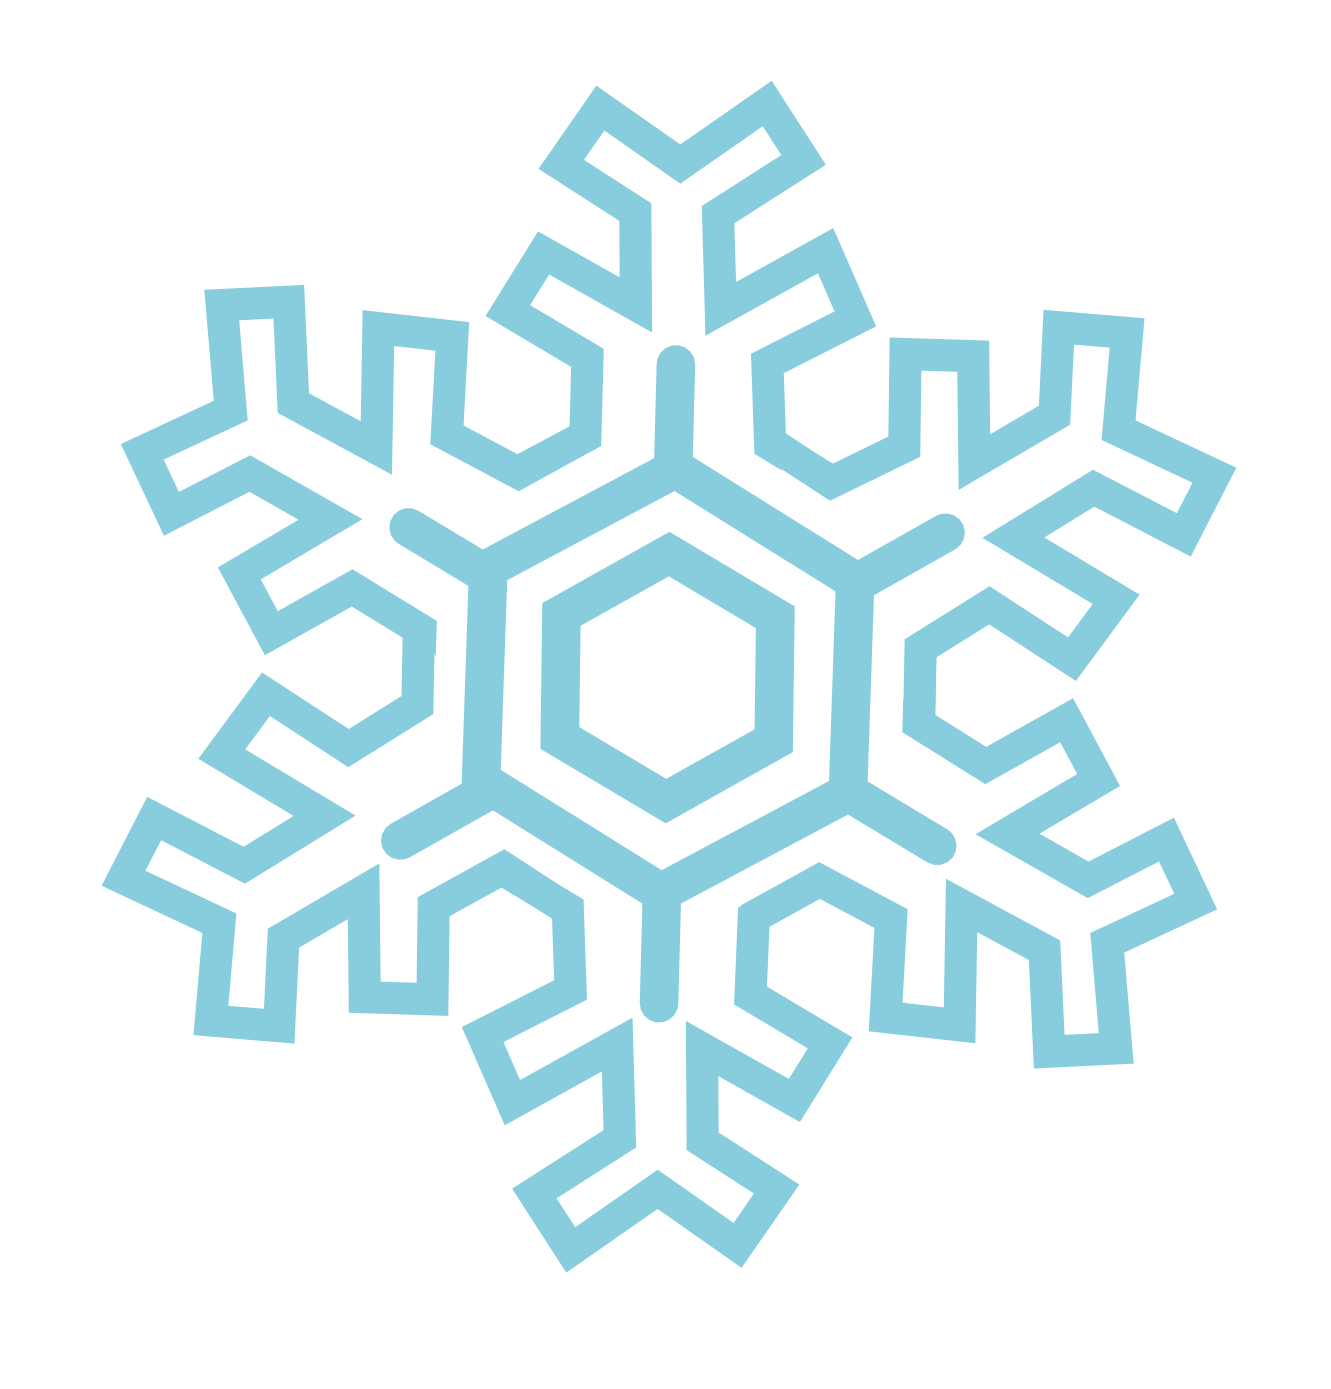 Snowflake clipart jpeg. Second logo pride in